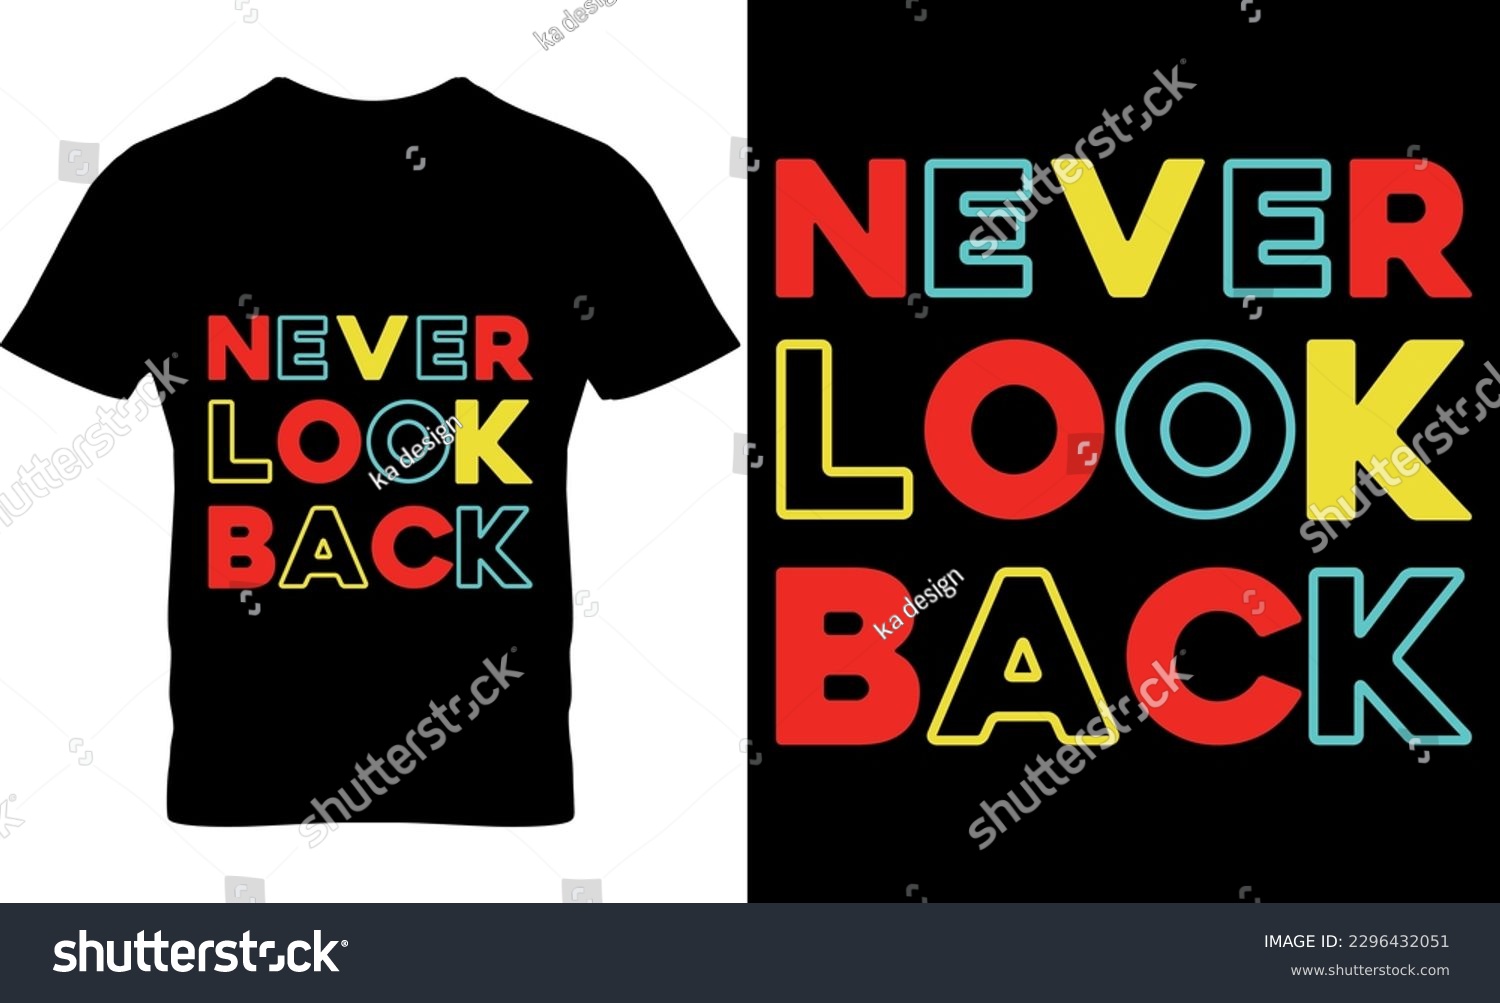 SVG of never look back, Graphic, illustration, vector, typography, motivational, inspiration, inspiration t-shirt design, Typography t-shirt design, motivational quotes, motivational t-shirt design, svg